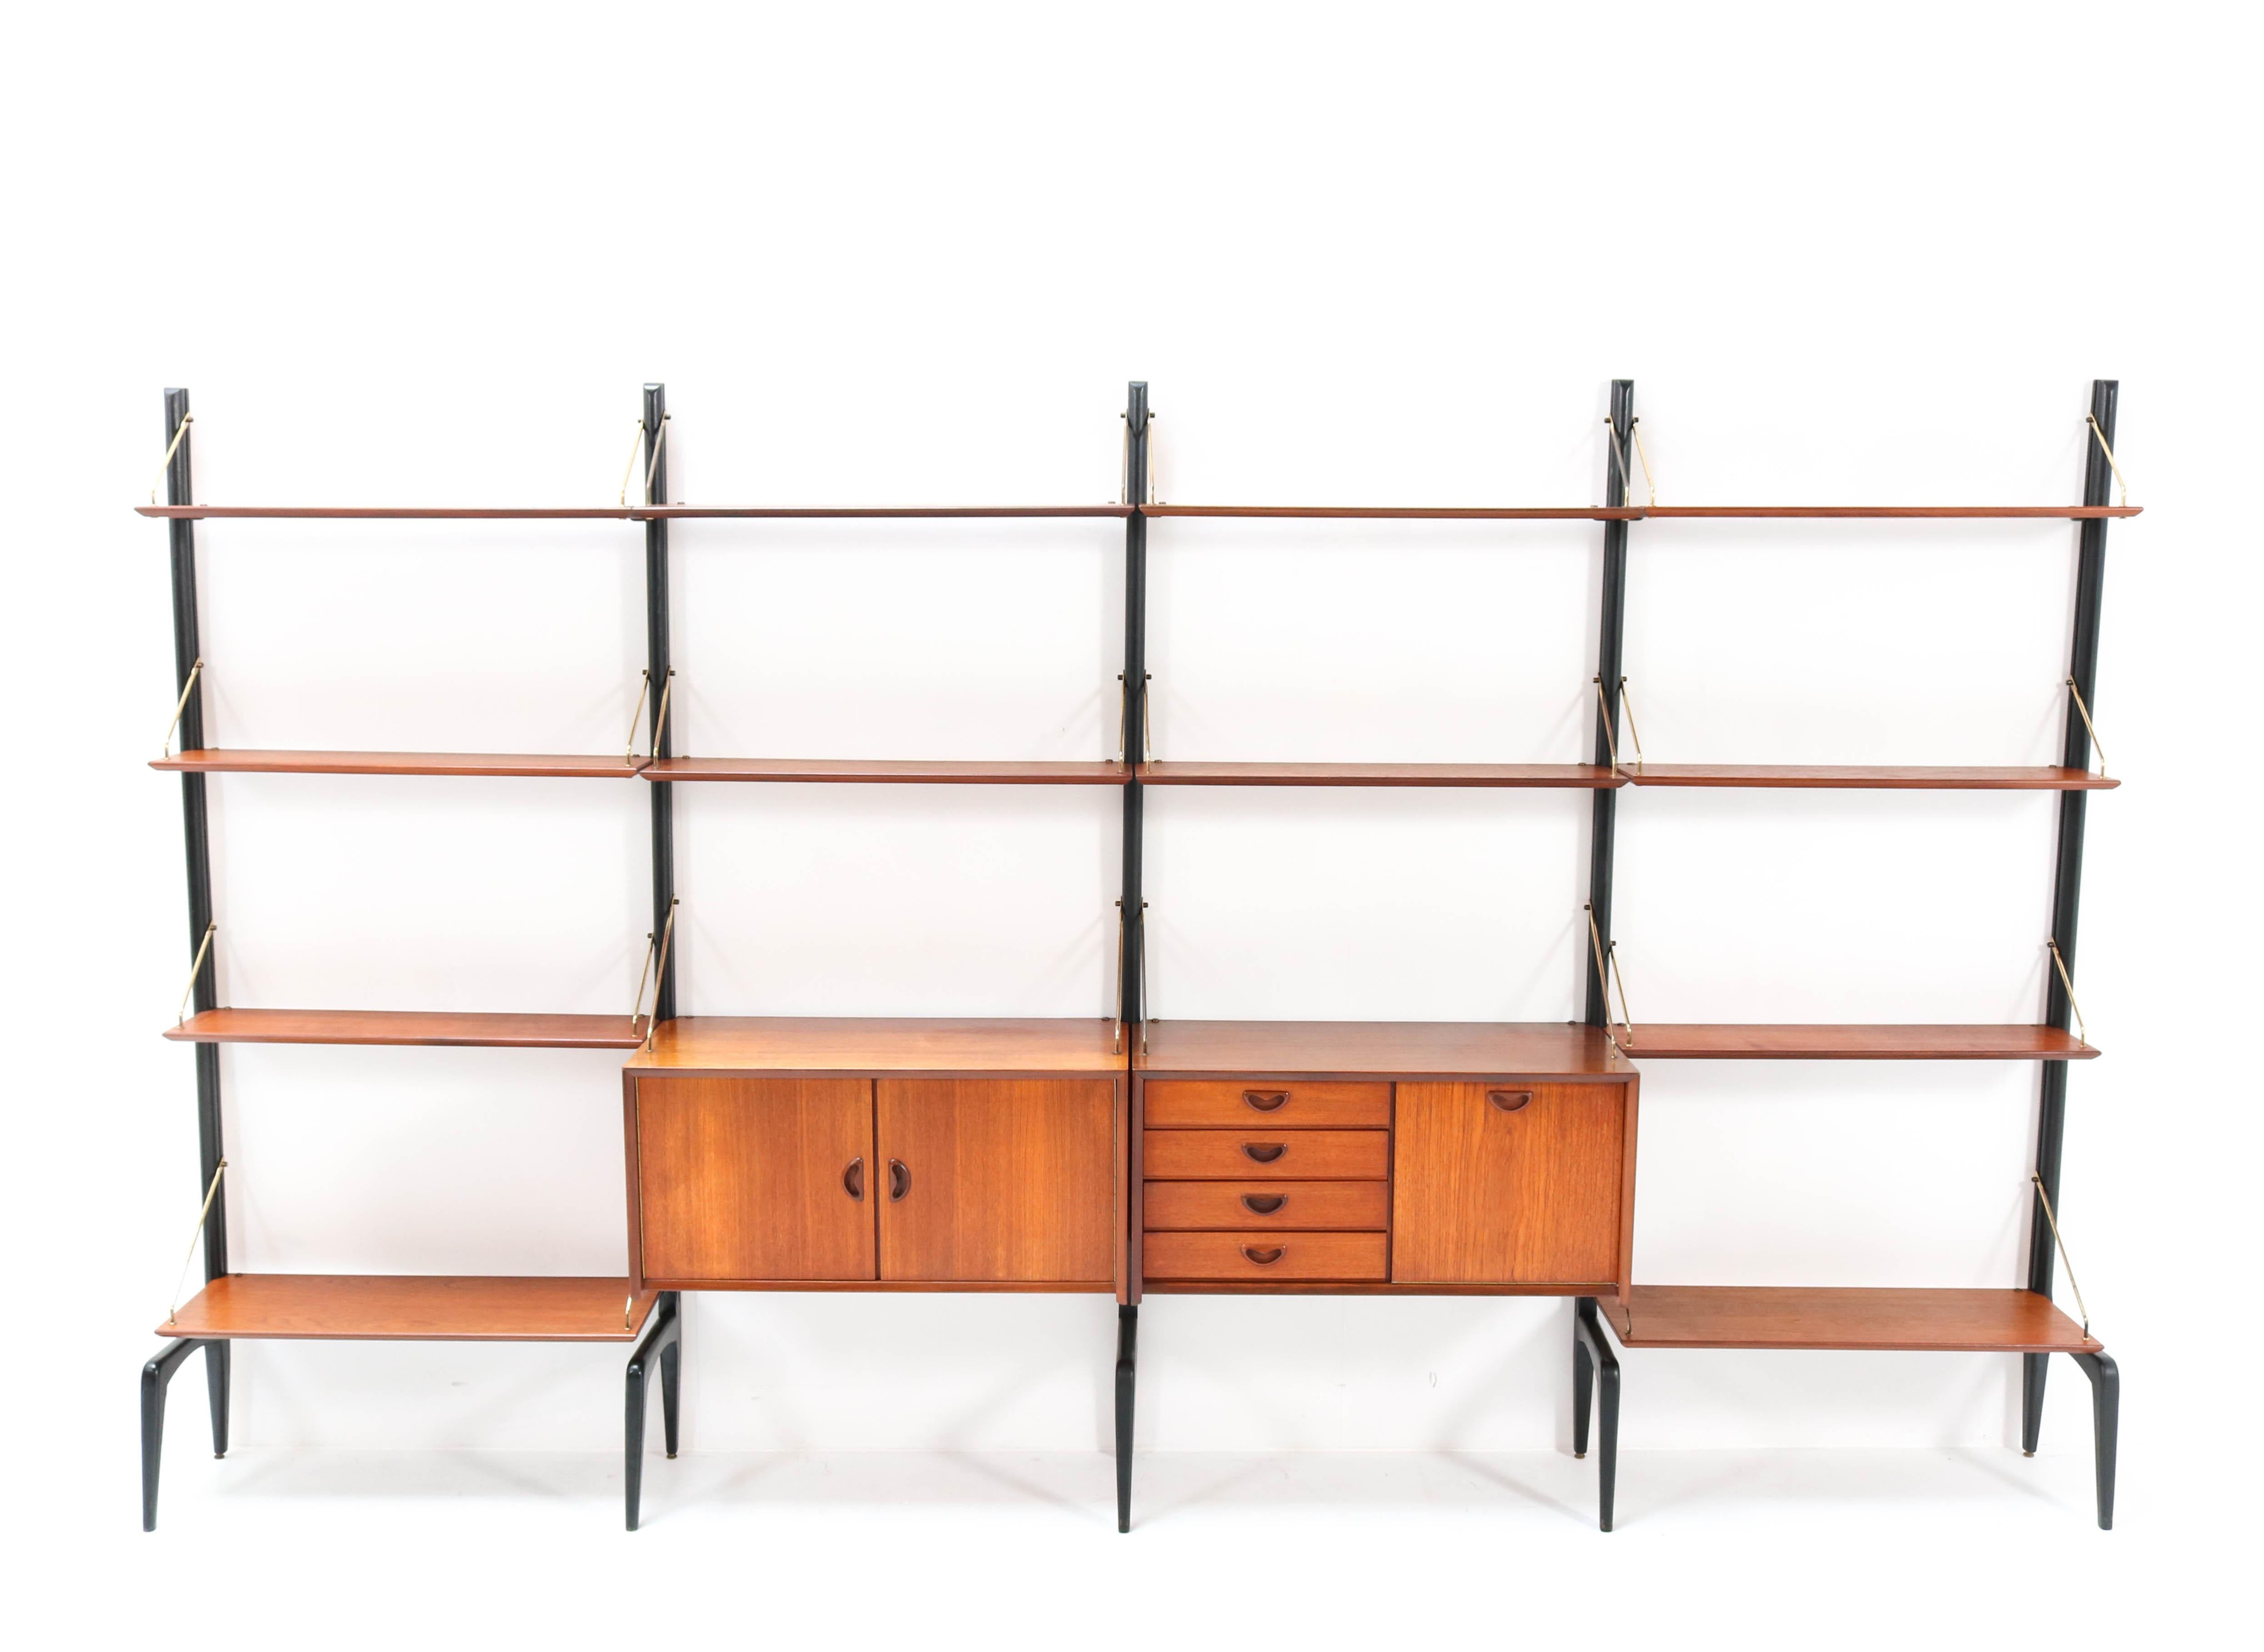 Magnificent and extra large Mid-Century Modern free standing modular wall unit.
Design by Louis van Teeffelen for Webe.
Striking Dutch design from the 1950s.
This wall unit consists of:
5 original black lacquered wooden uprights H: 200 cm or